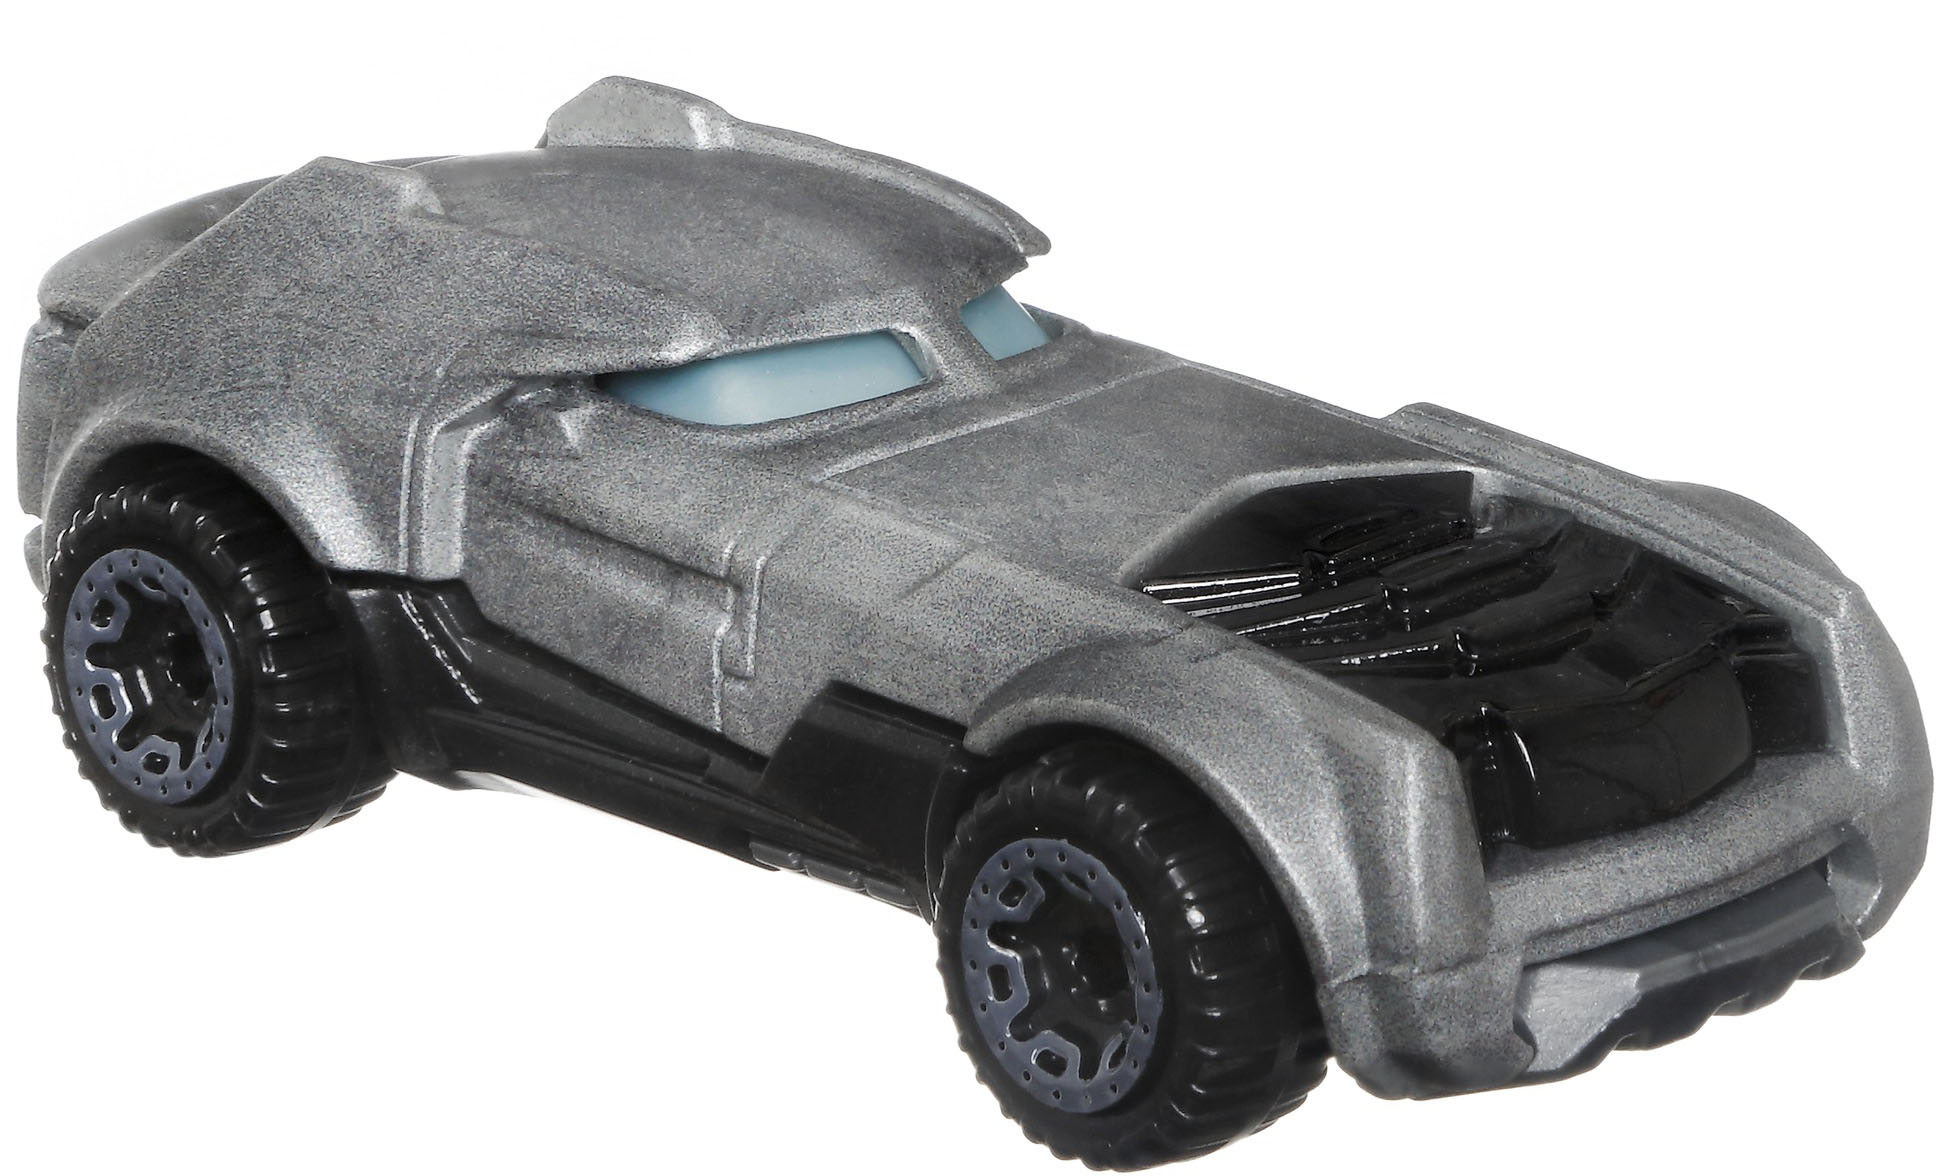 Hot Wheels Batman 5-Pack, Set of 5 Batman-Themed Toy Cars in 1:64 Scale  (Styles May Vary)